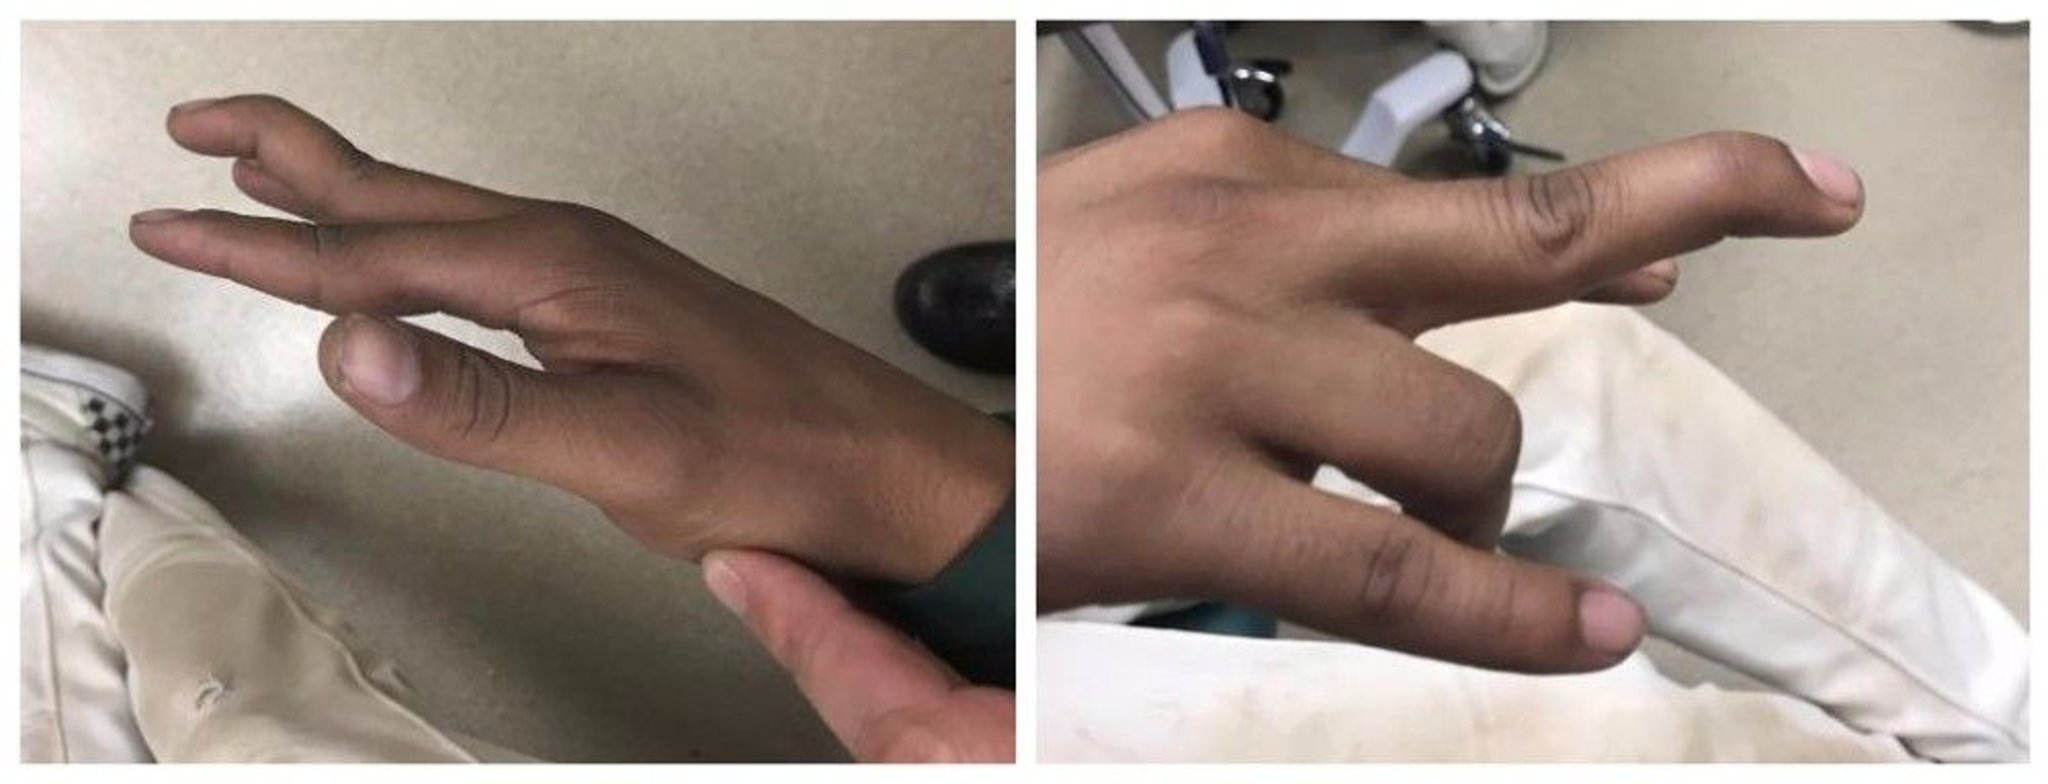 Dislocation of the Proximal Interphalangeal Joint